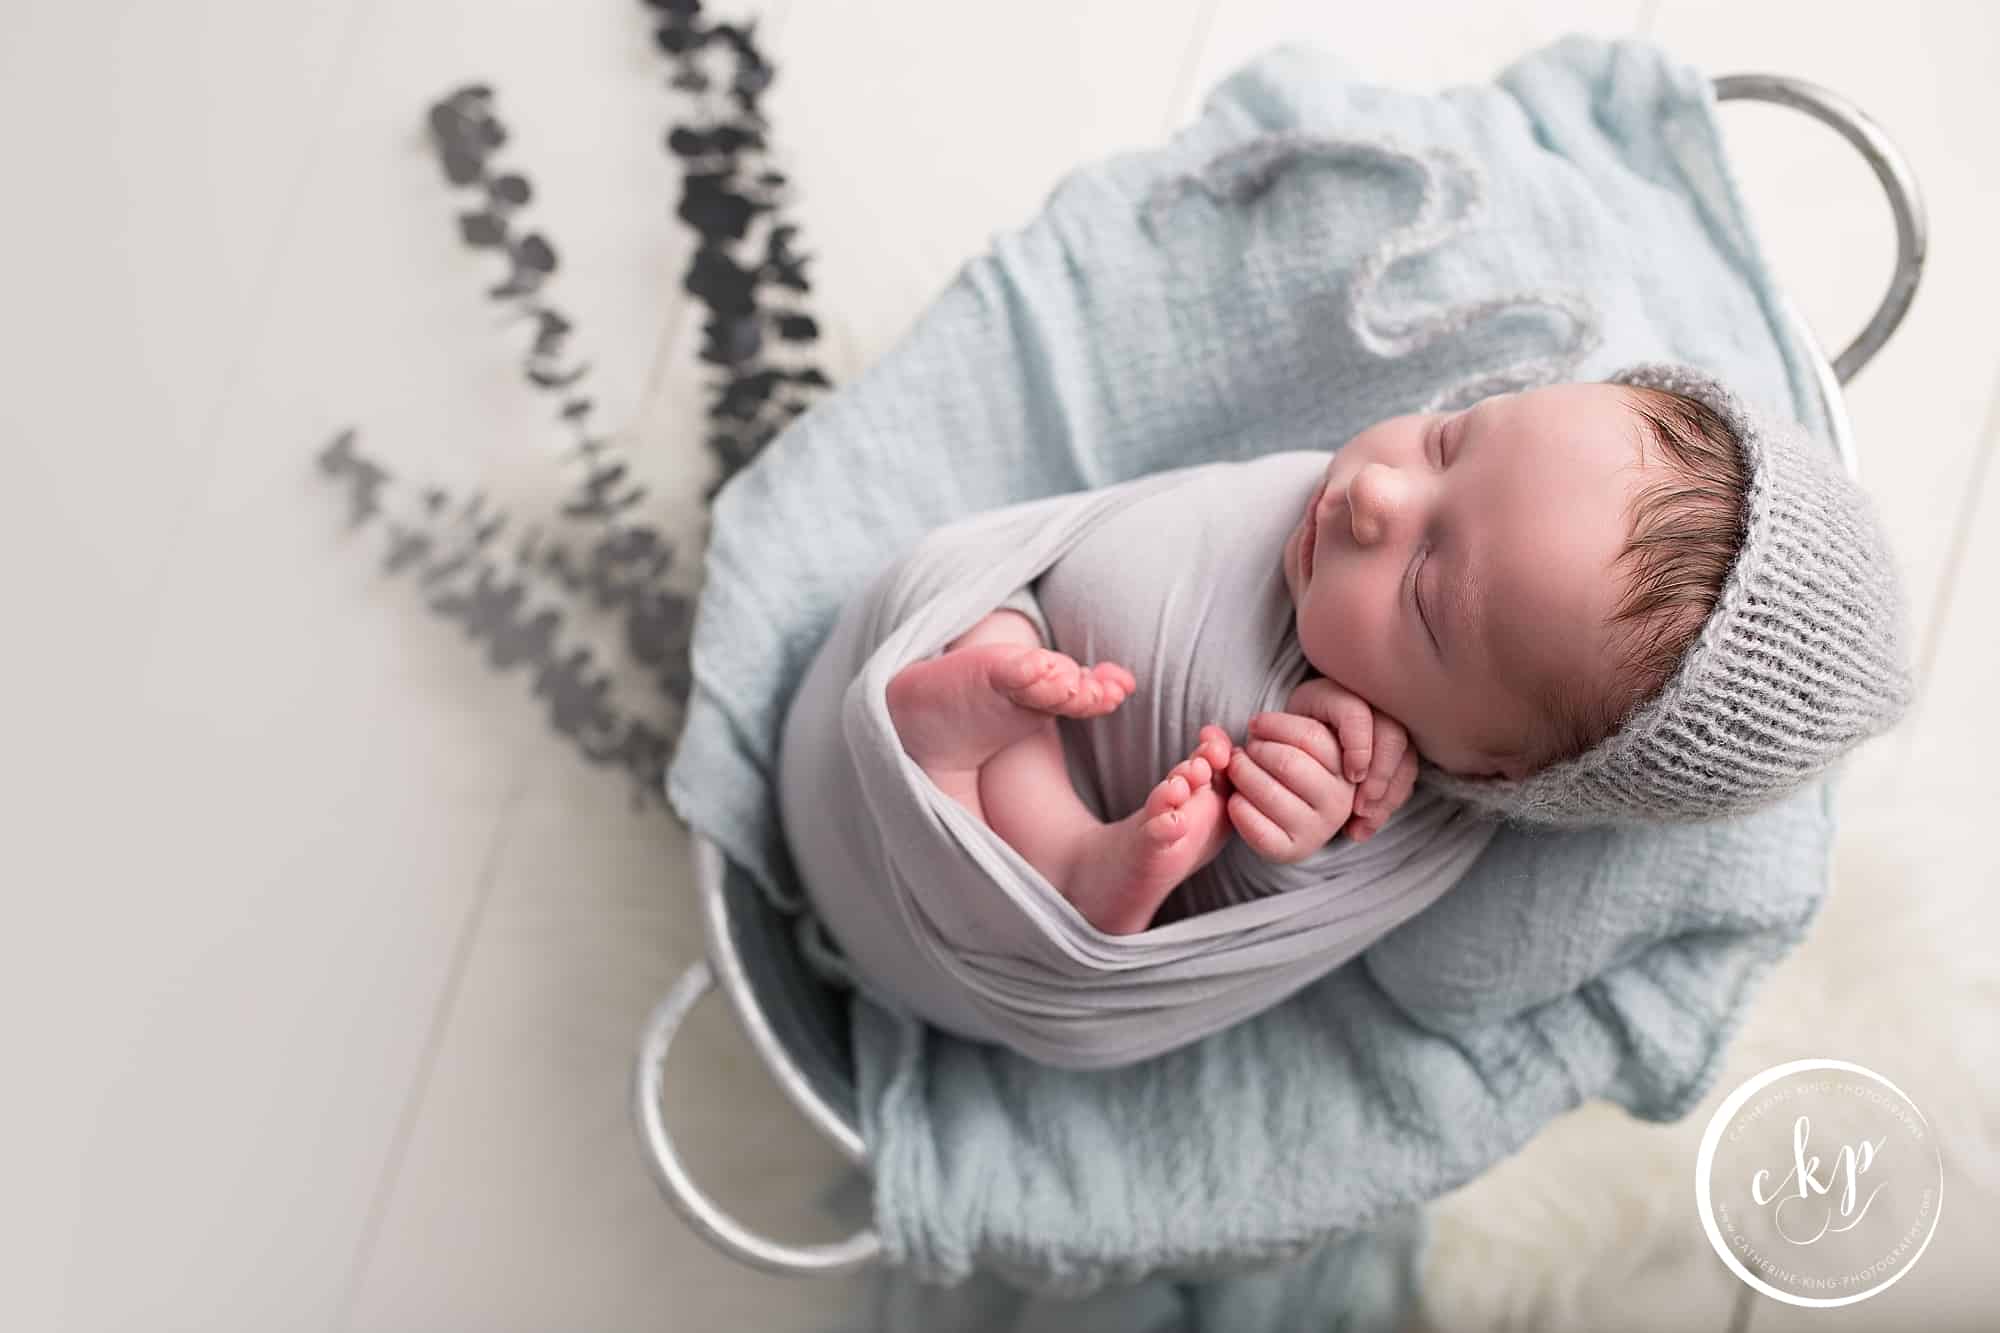 Newborn photography session with catherine king photography a newborn photographer in ct | Lennox